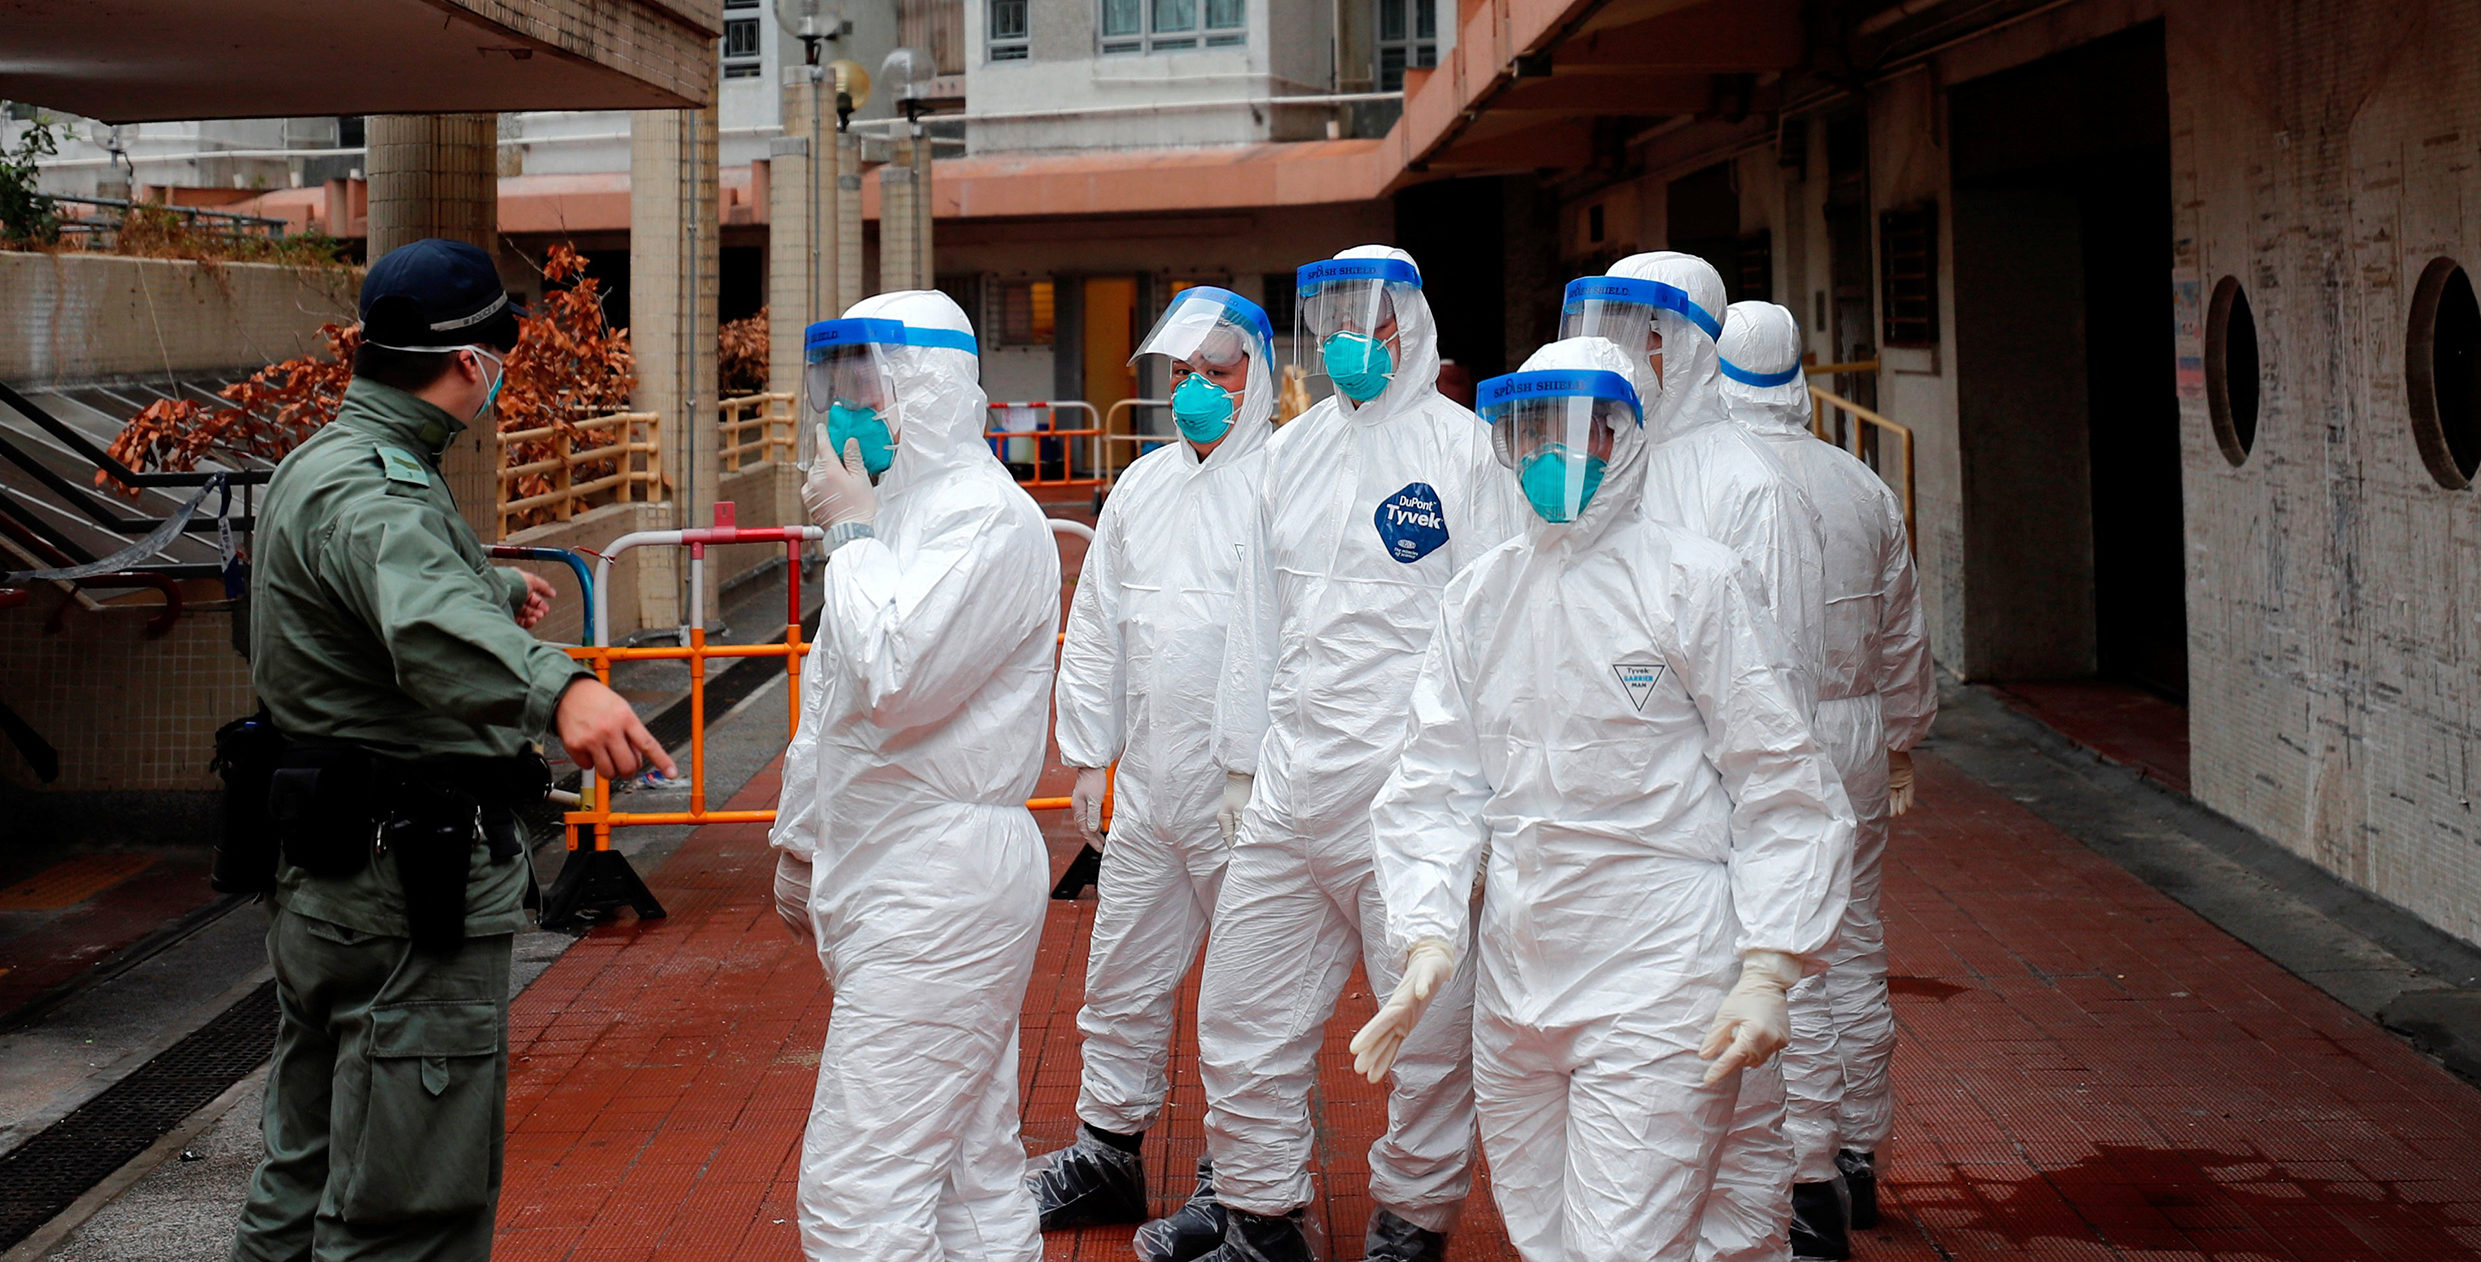 450,000 protective TYVEK suits landed in Dallas, Texas from Vietnam!